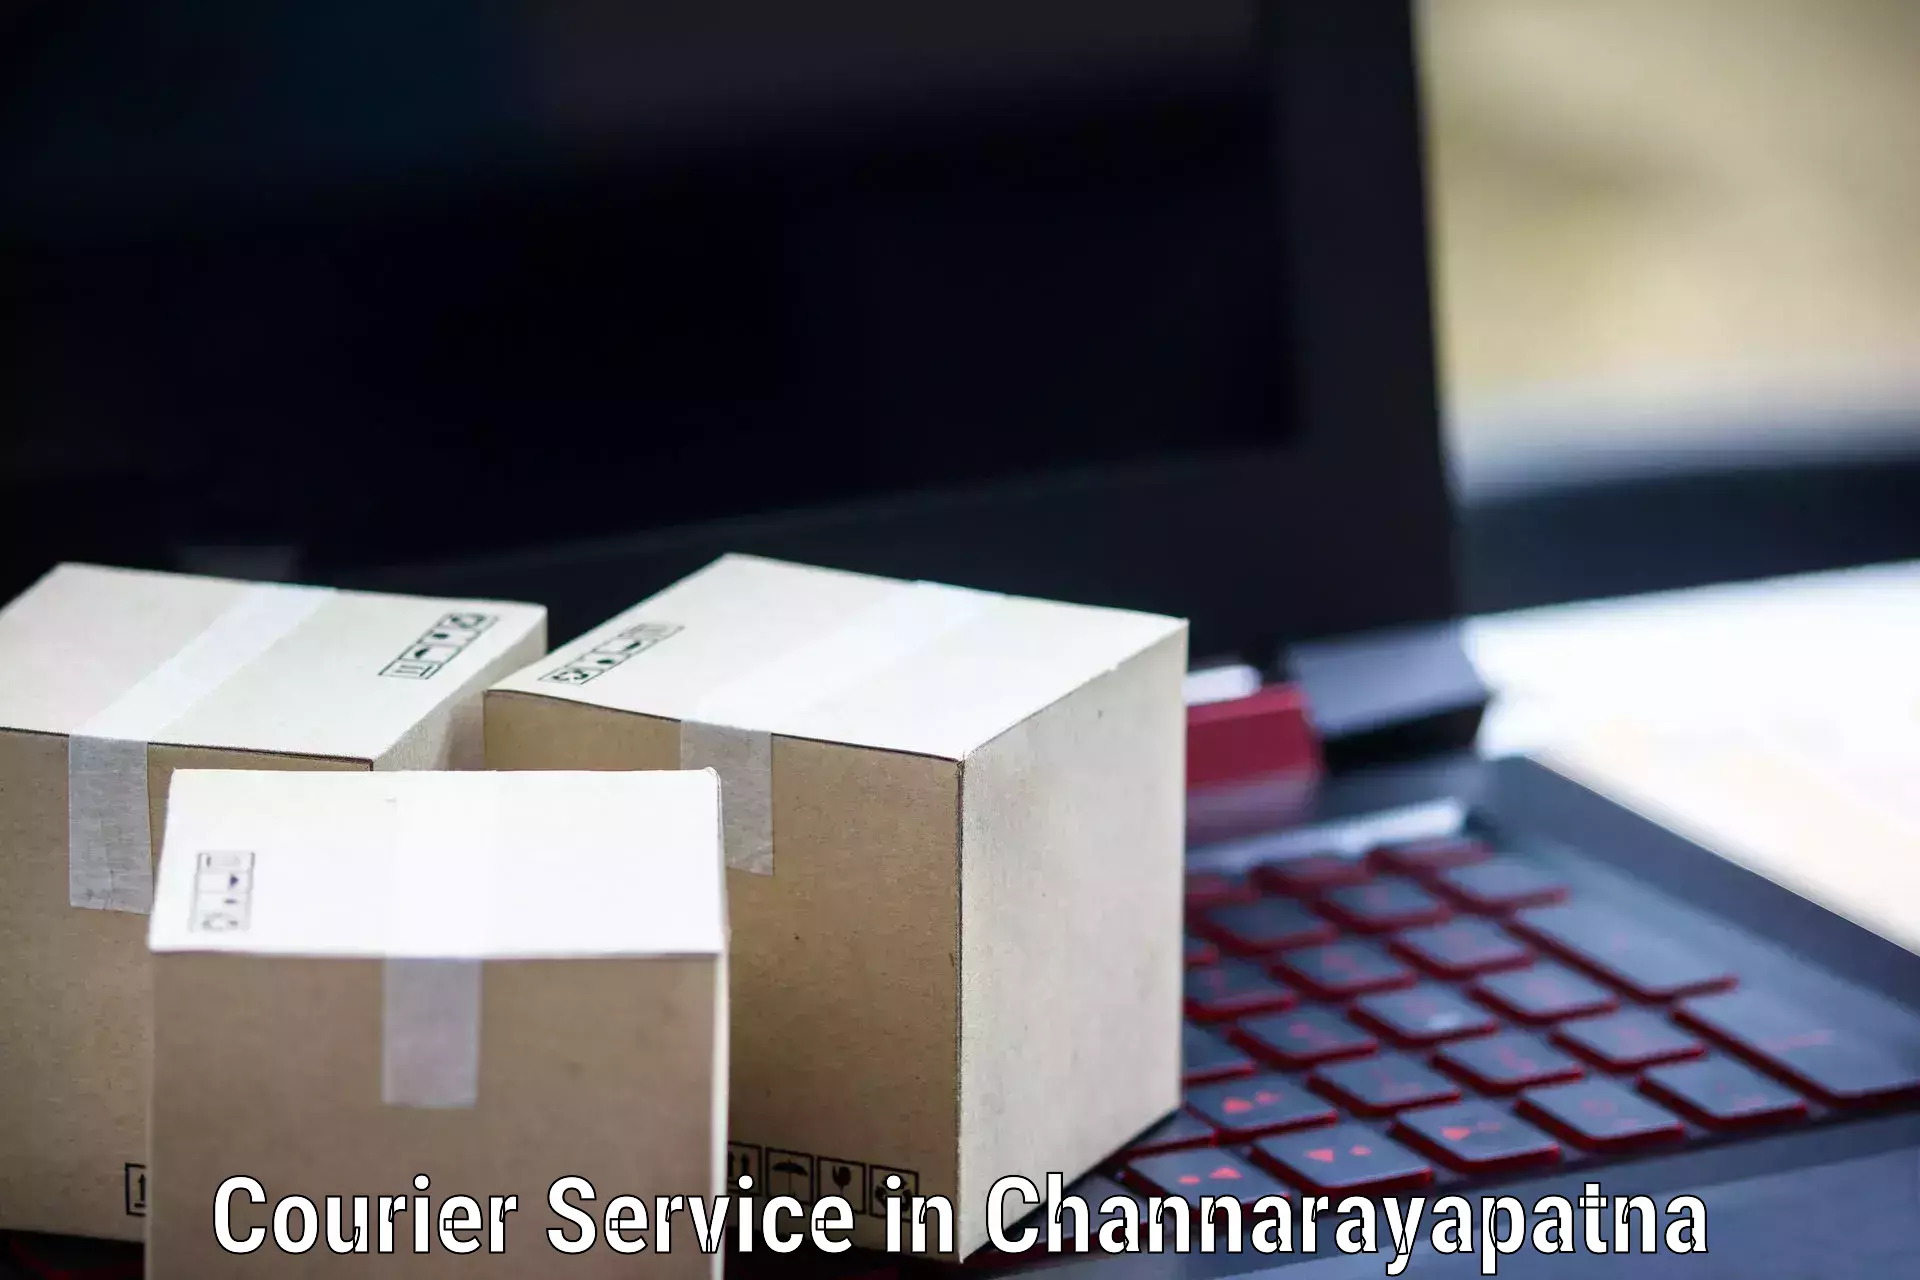 Same-day delivery solutions in Channarayapatna